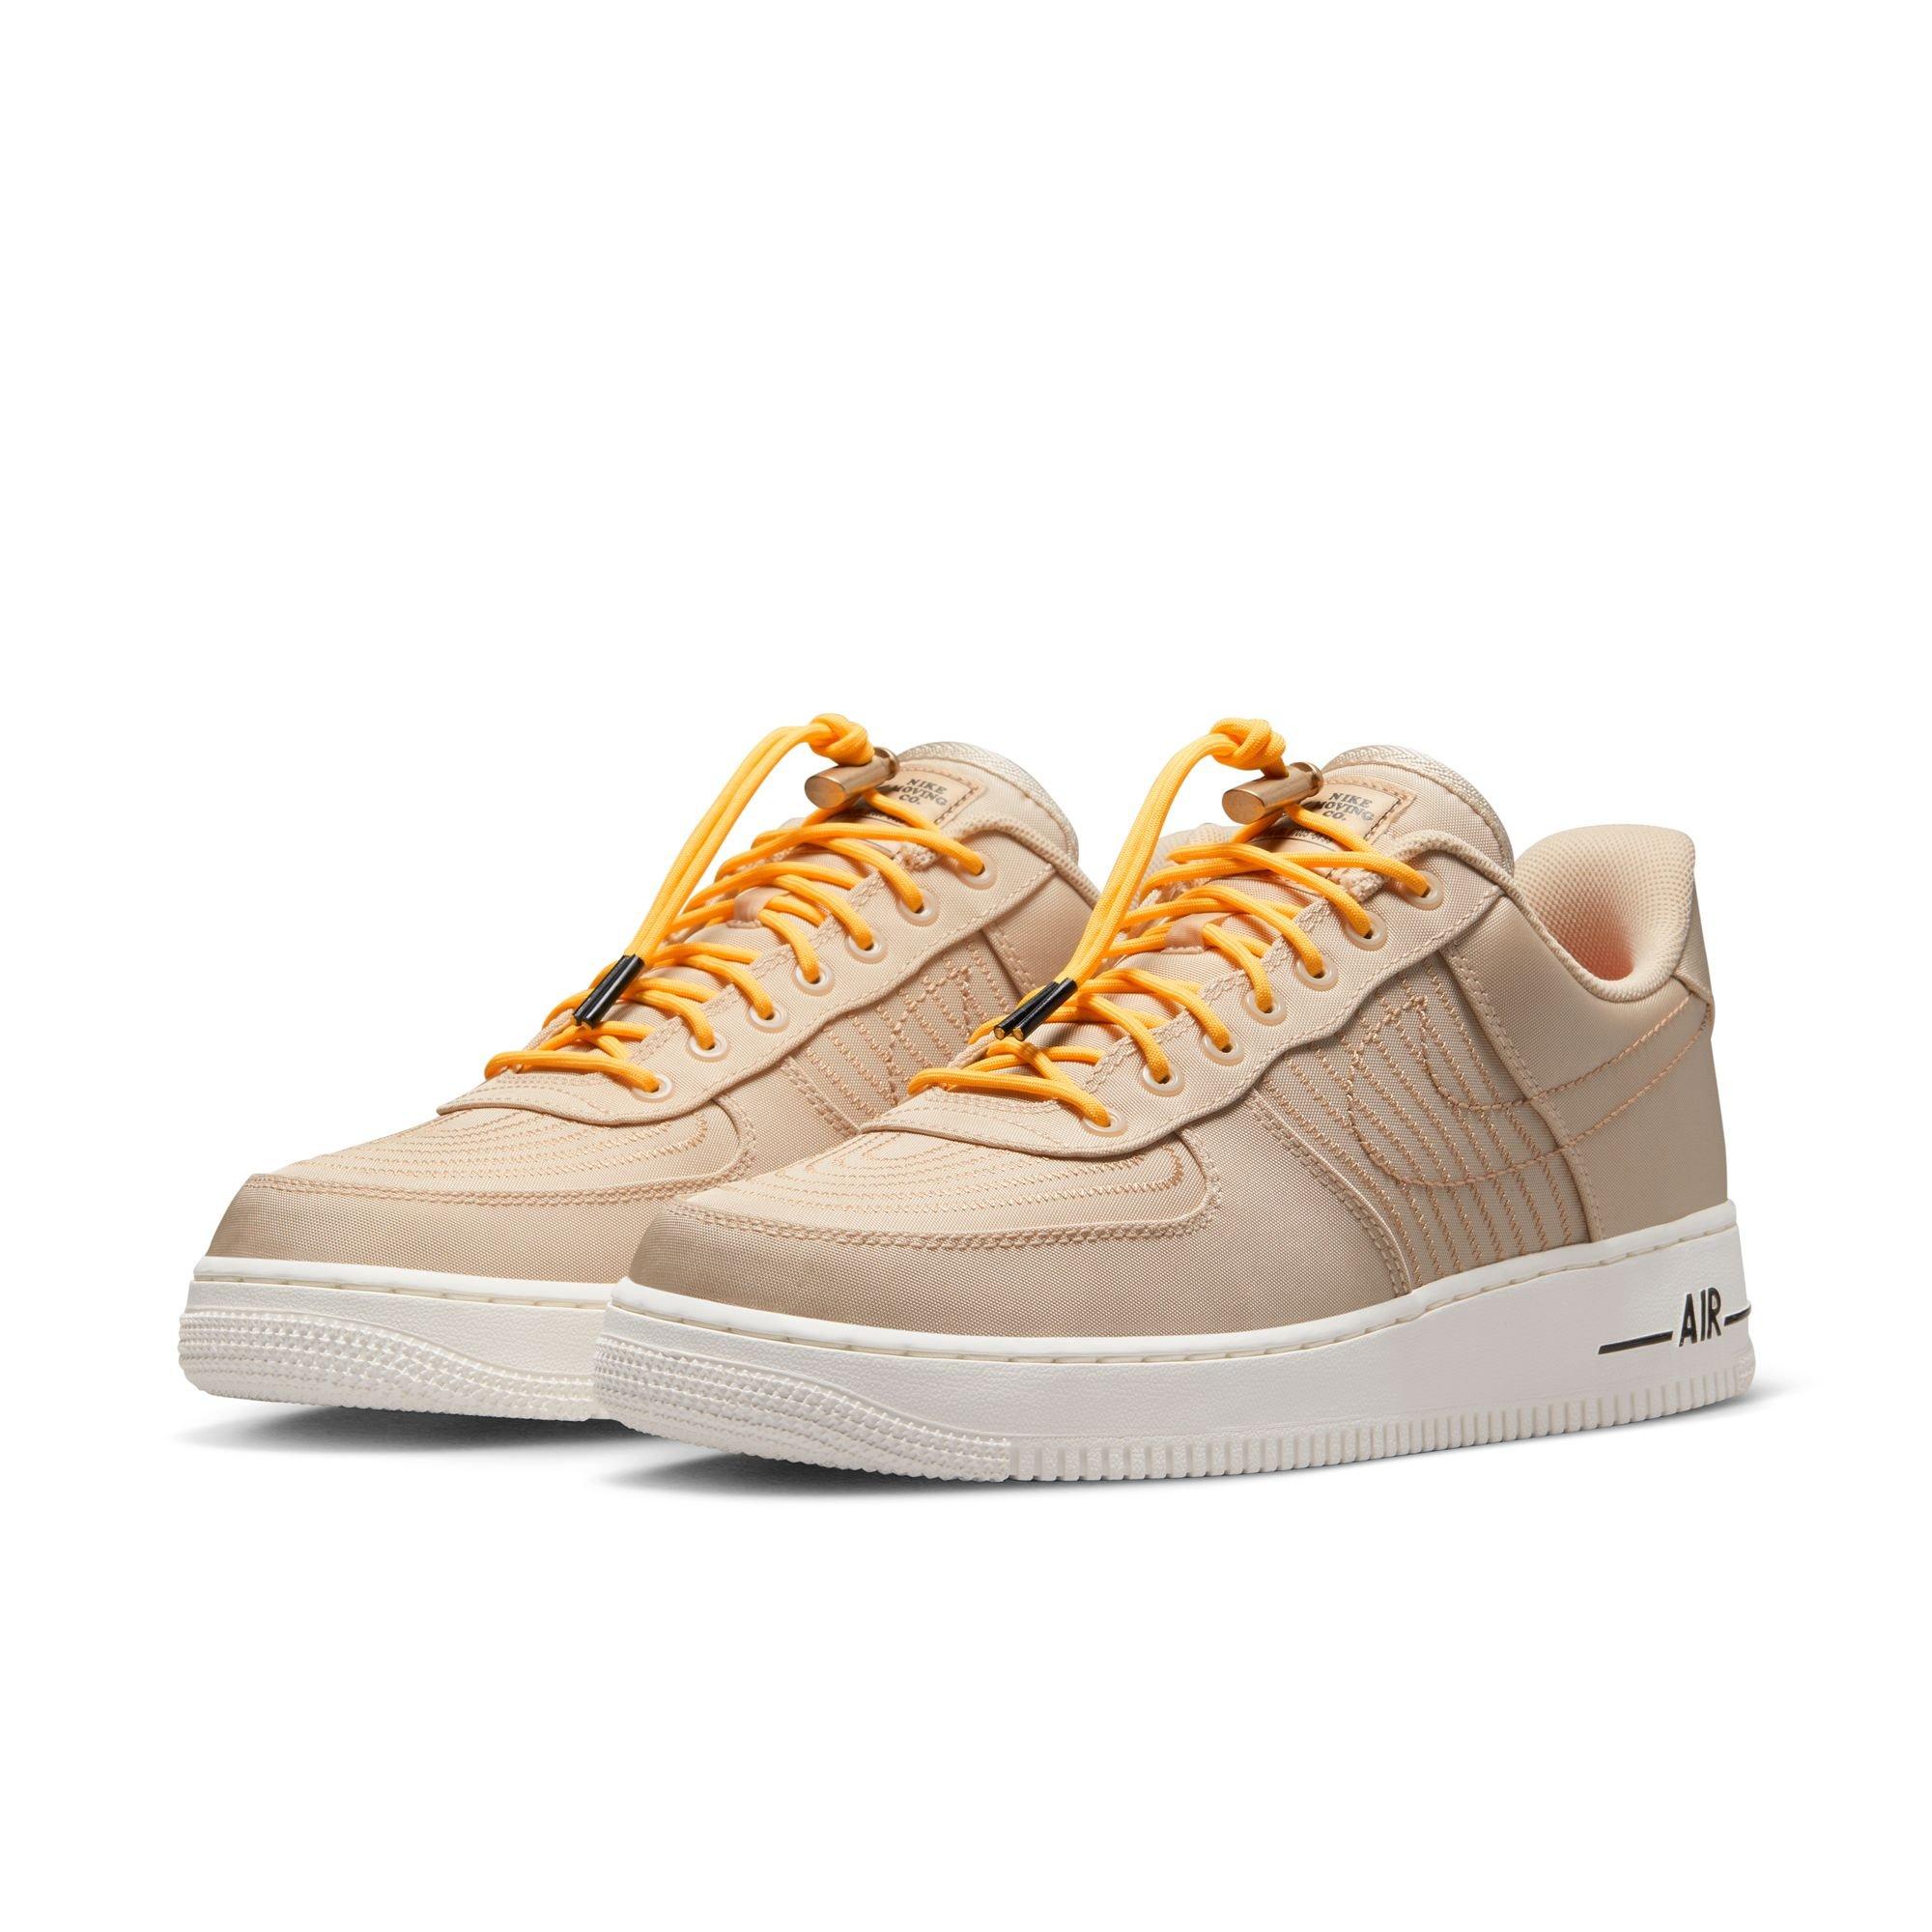 NIKE AIR FORCE 1 HIGH '07 LV8 MOVE - Sanches Store